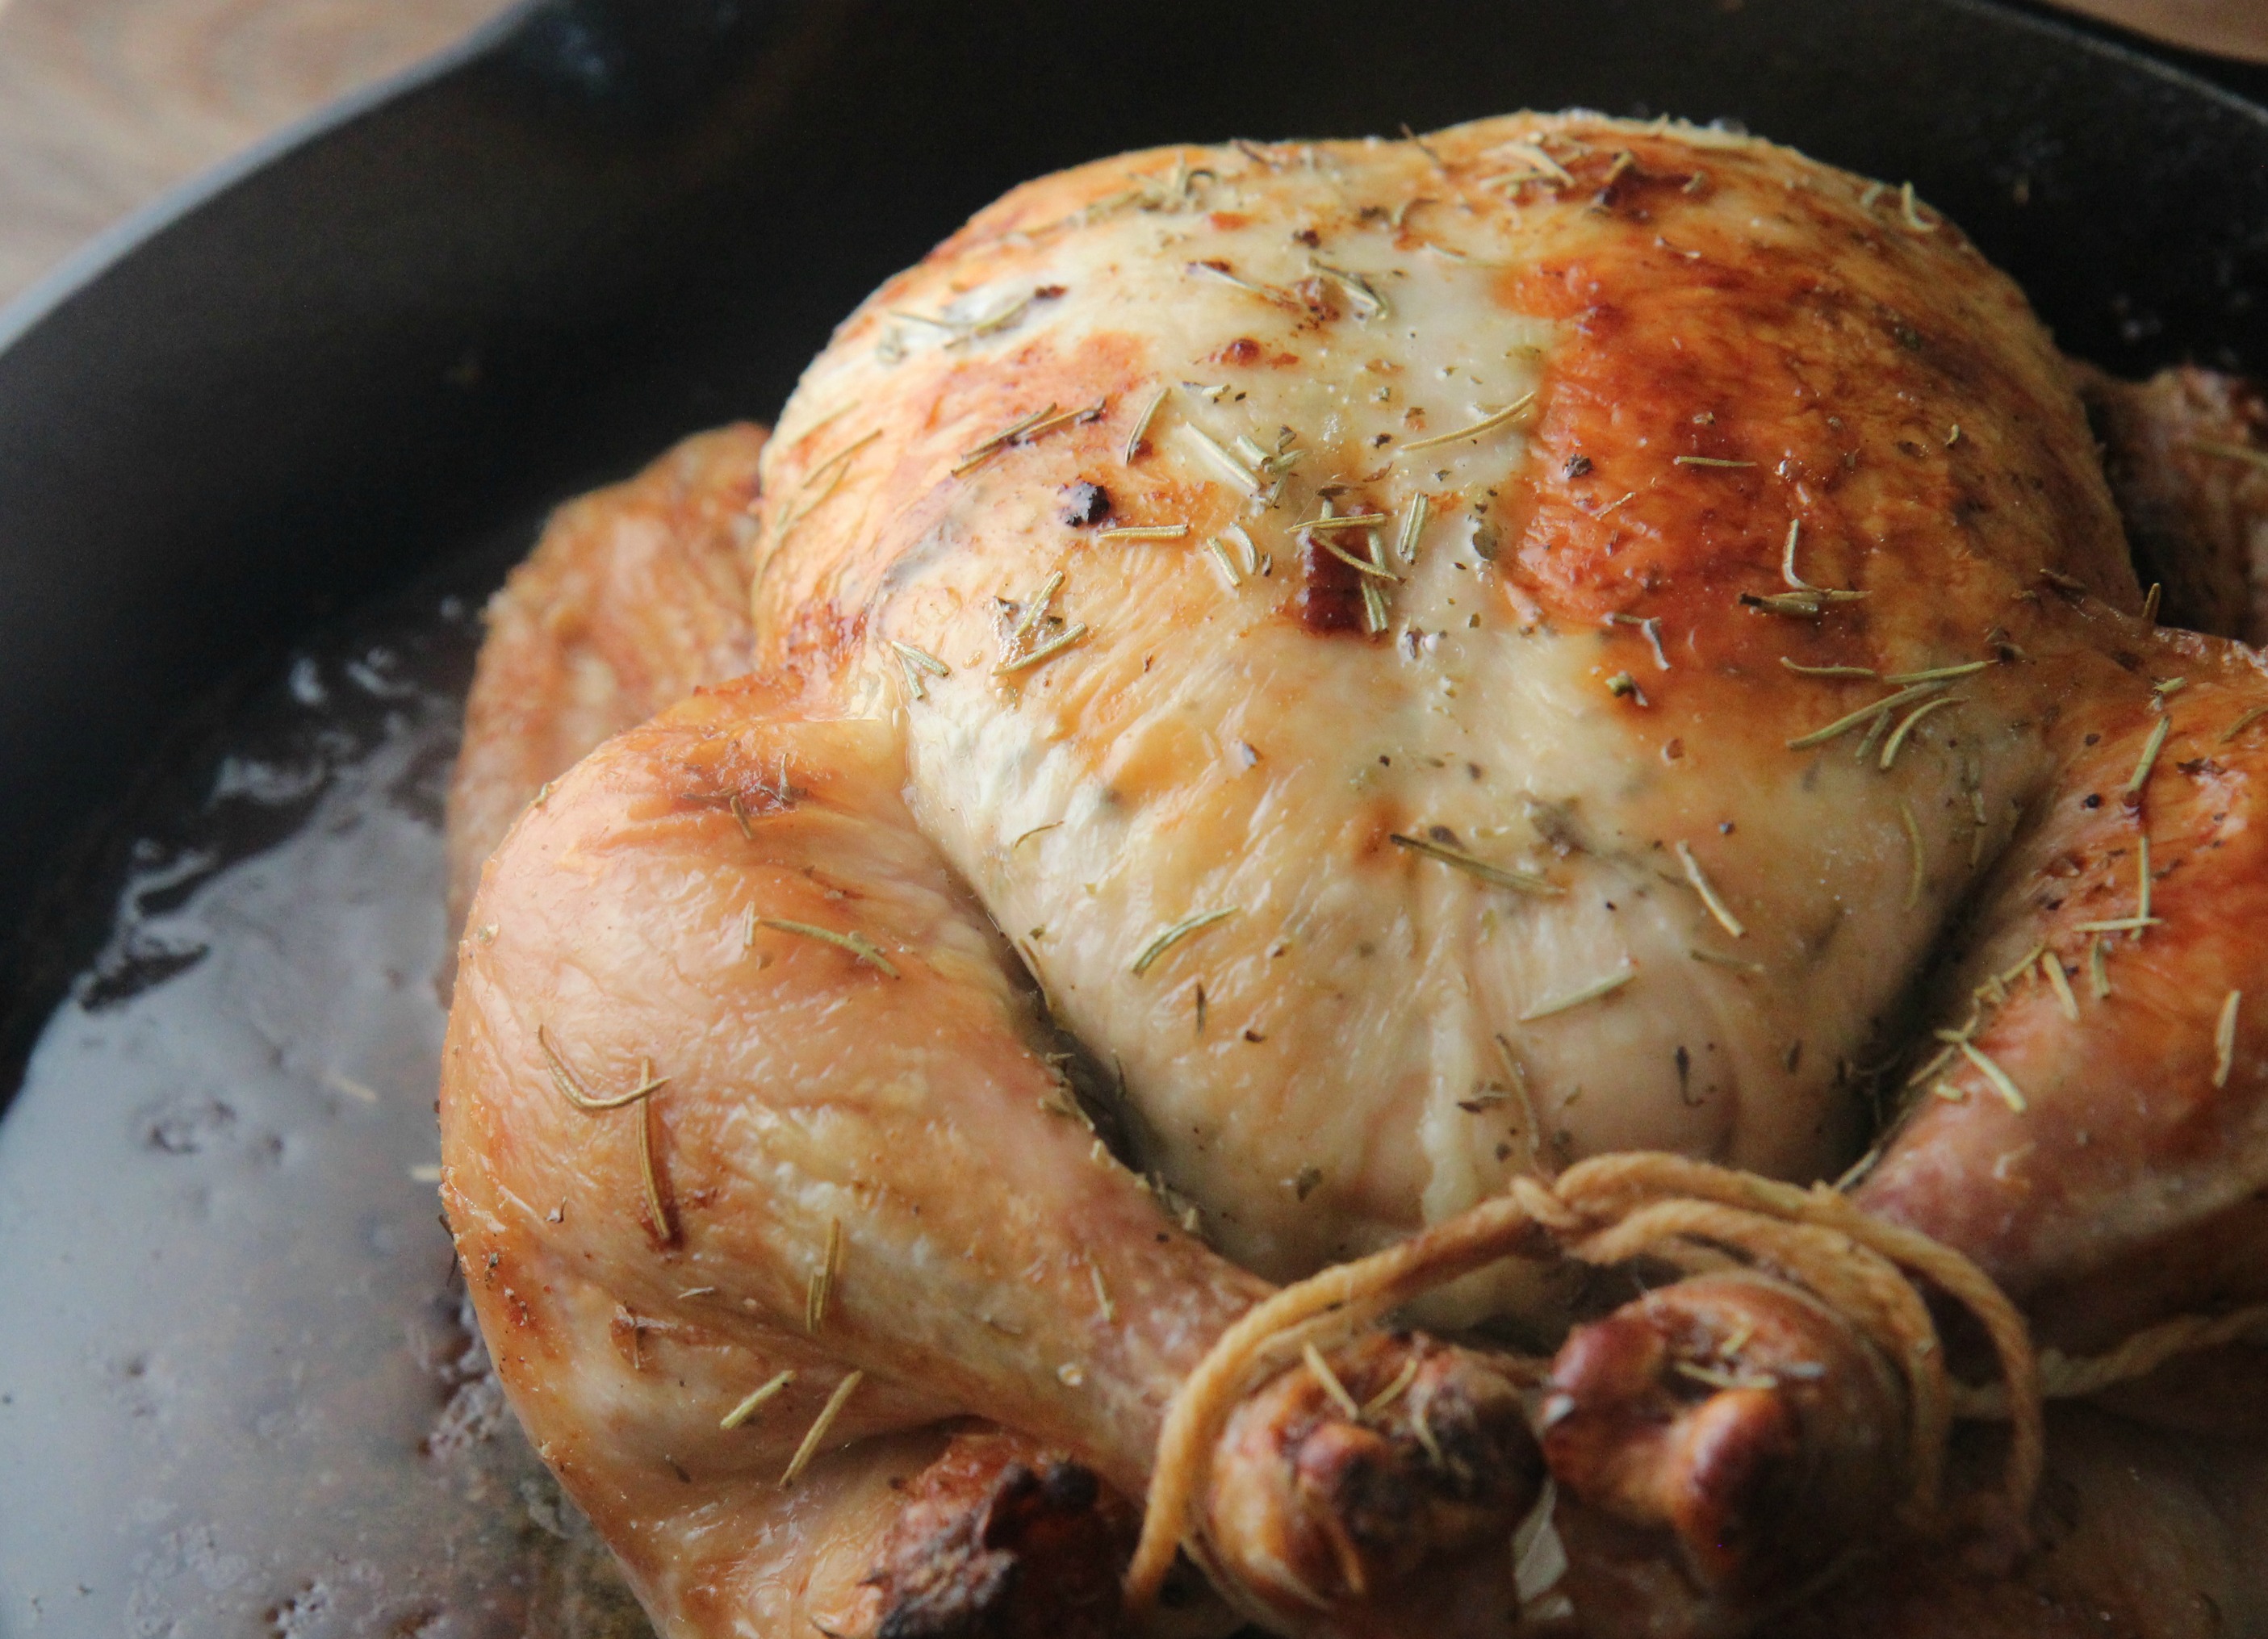 This juicy roasted chicken recipe leaves the skin crispy and flavor with moist and juicy, perfectly cooked meat